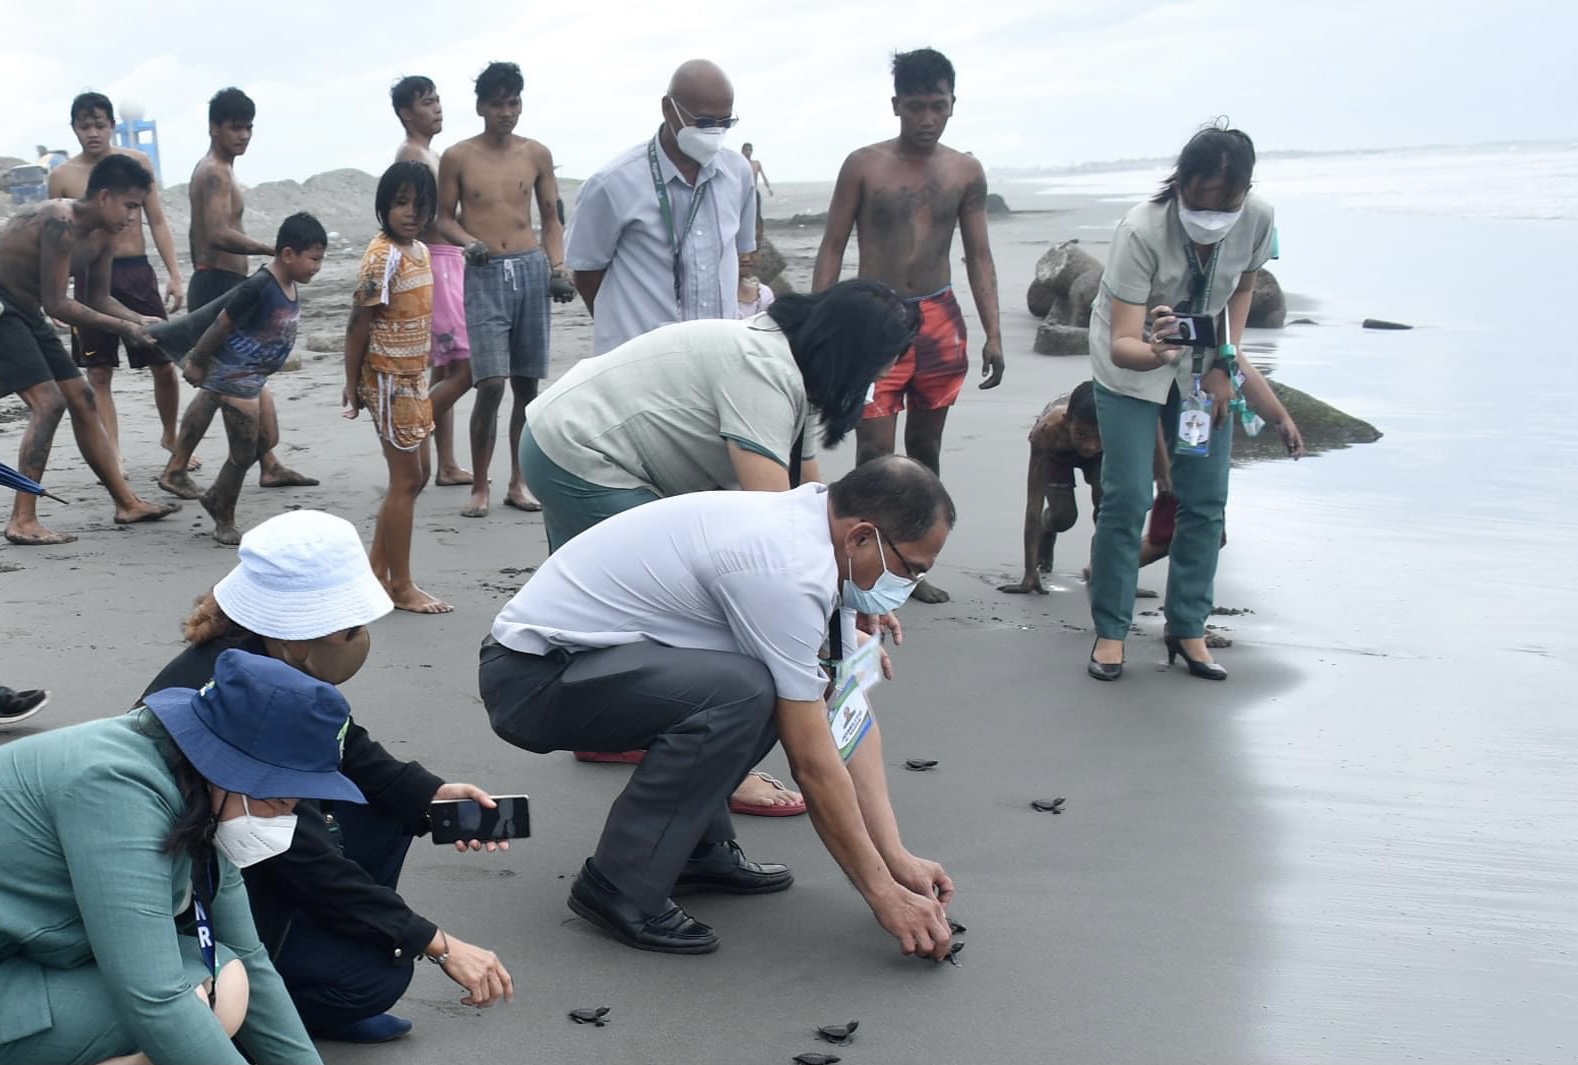 Twenty baby Olive ridley sea turtles (Lepidochelys olivacea) were released to their natural habitat on the coasts of Aparri town, Cagayan province, the Department of Environment and Natural Resources (DENR) in Cagayan Valley announced on Tuesday (Feb. 15).